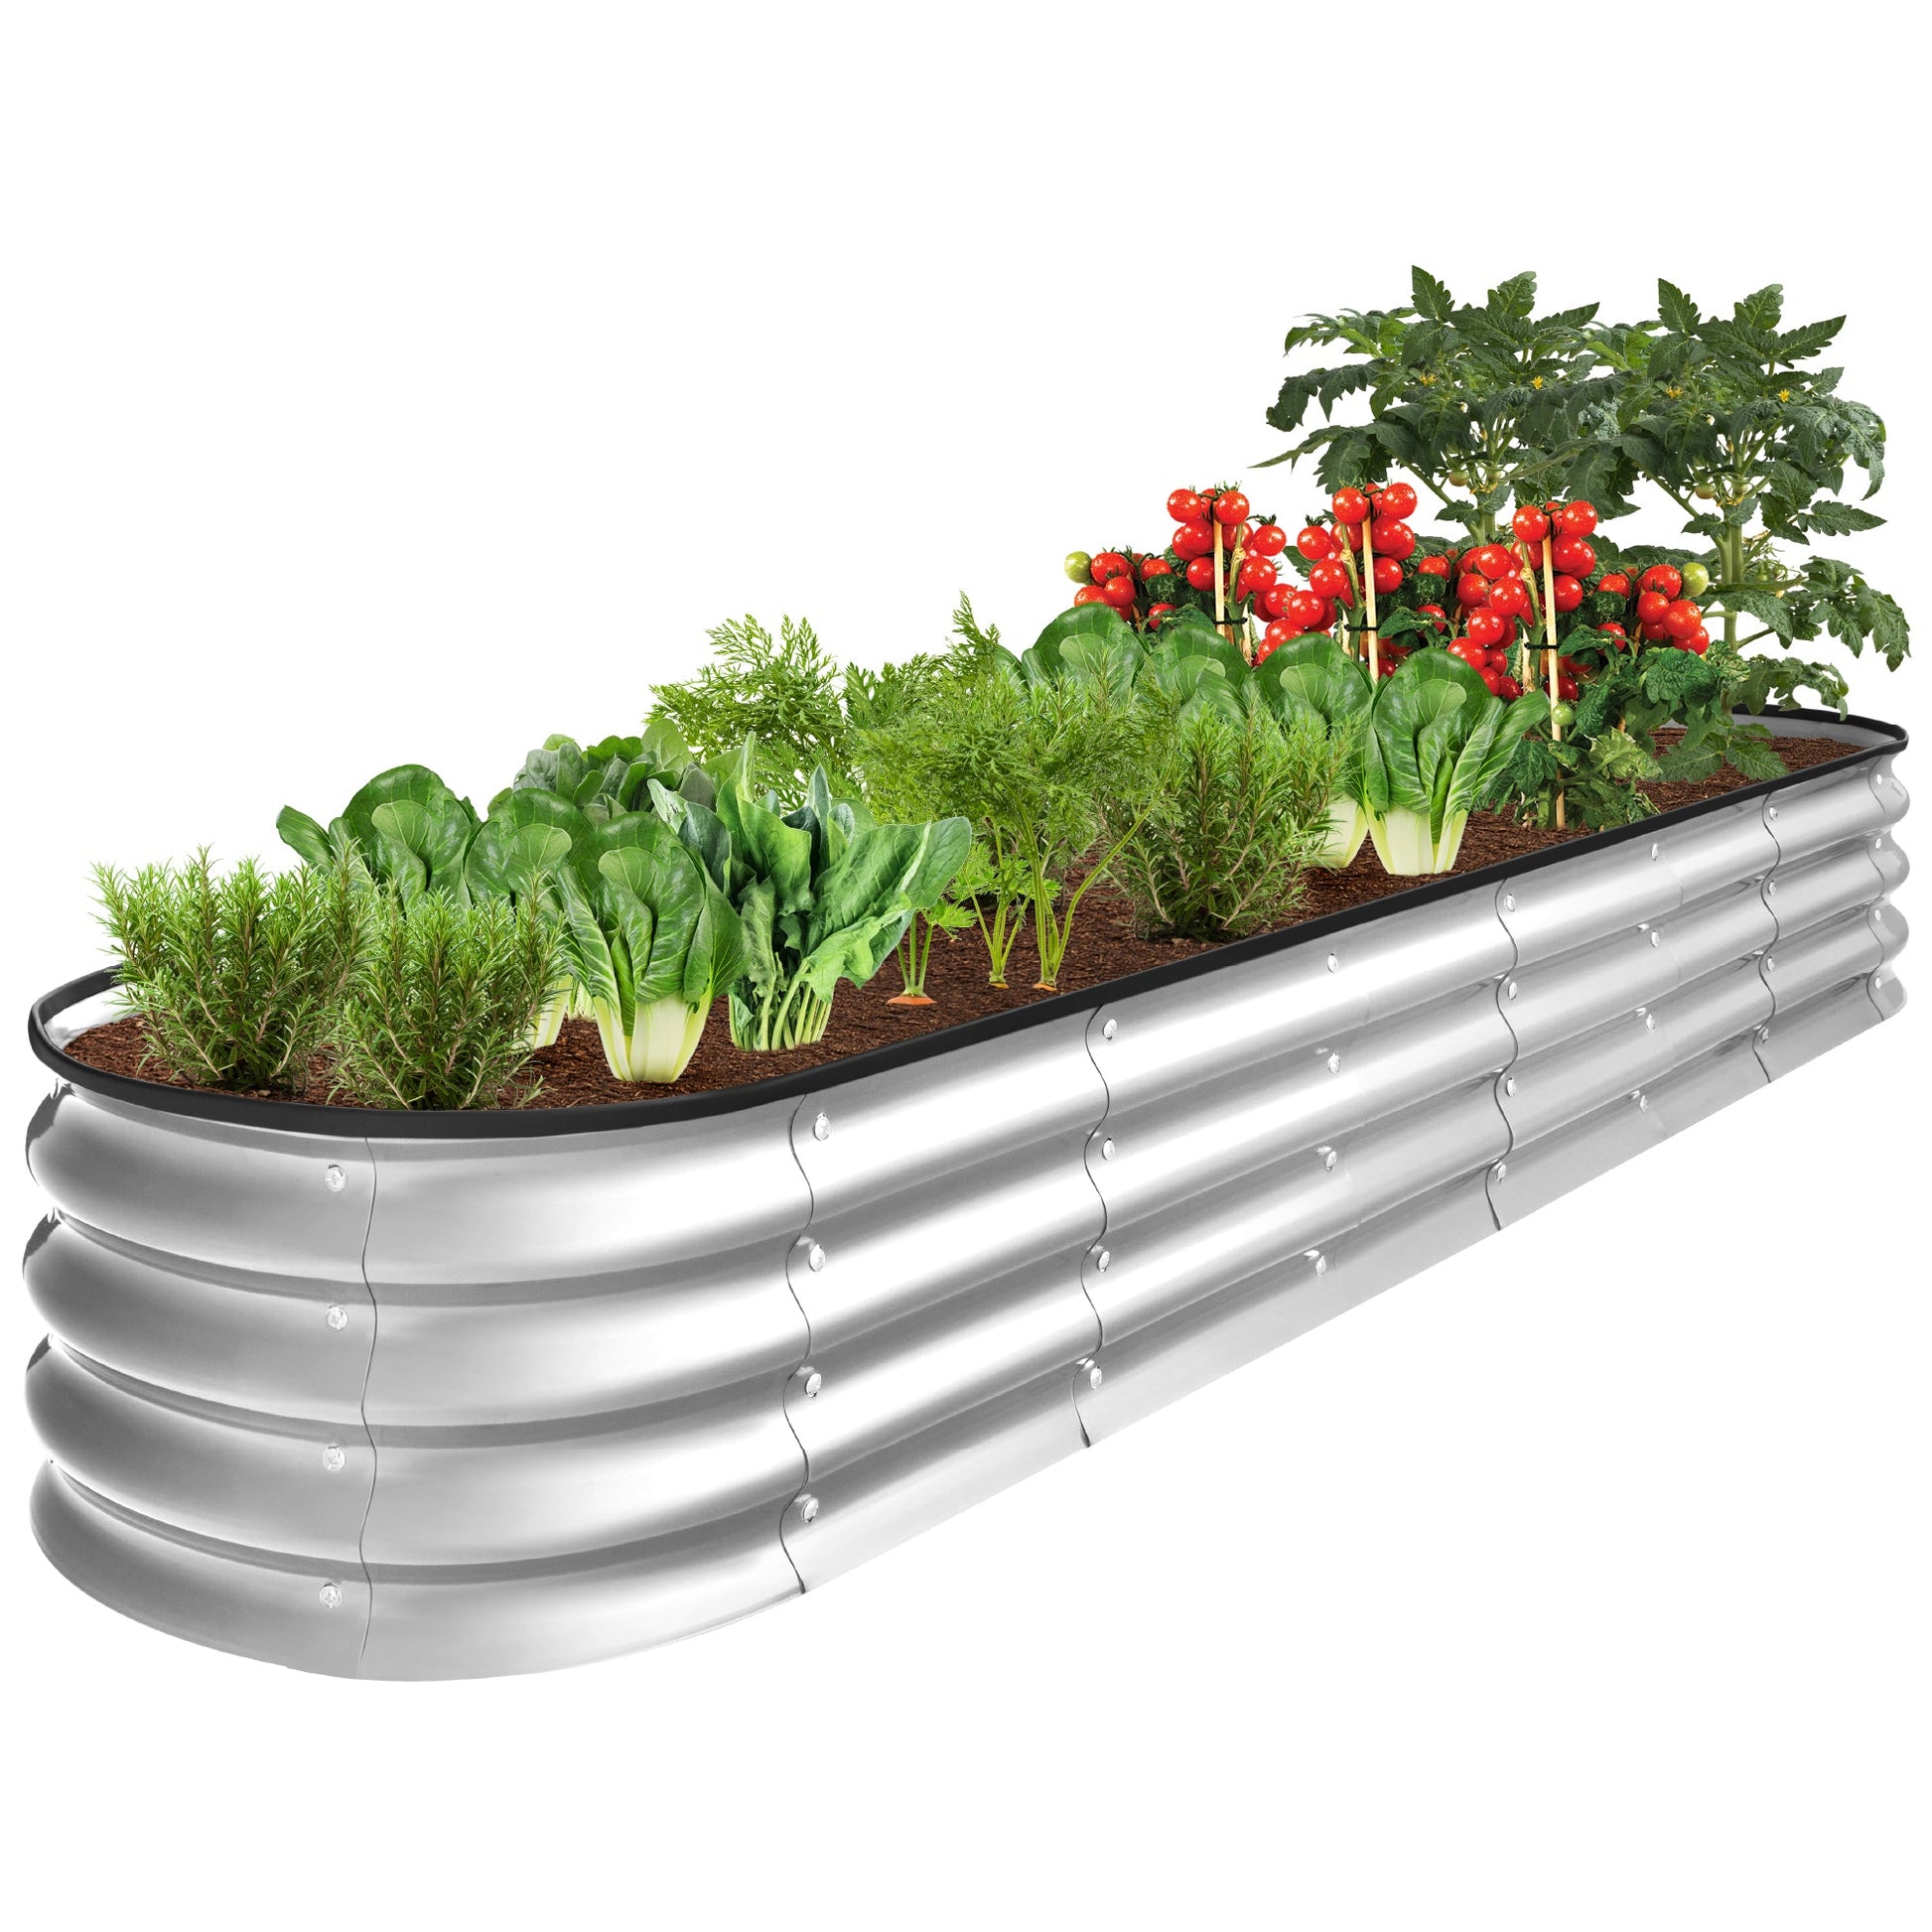 Outdoor Metal Raised Oval Garden Bed for Vegetables, Flowers - 8x2x1ft